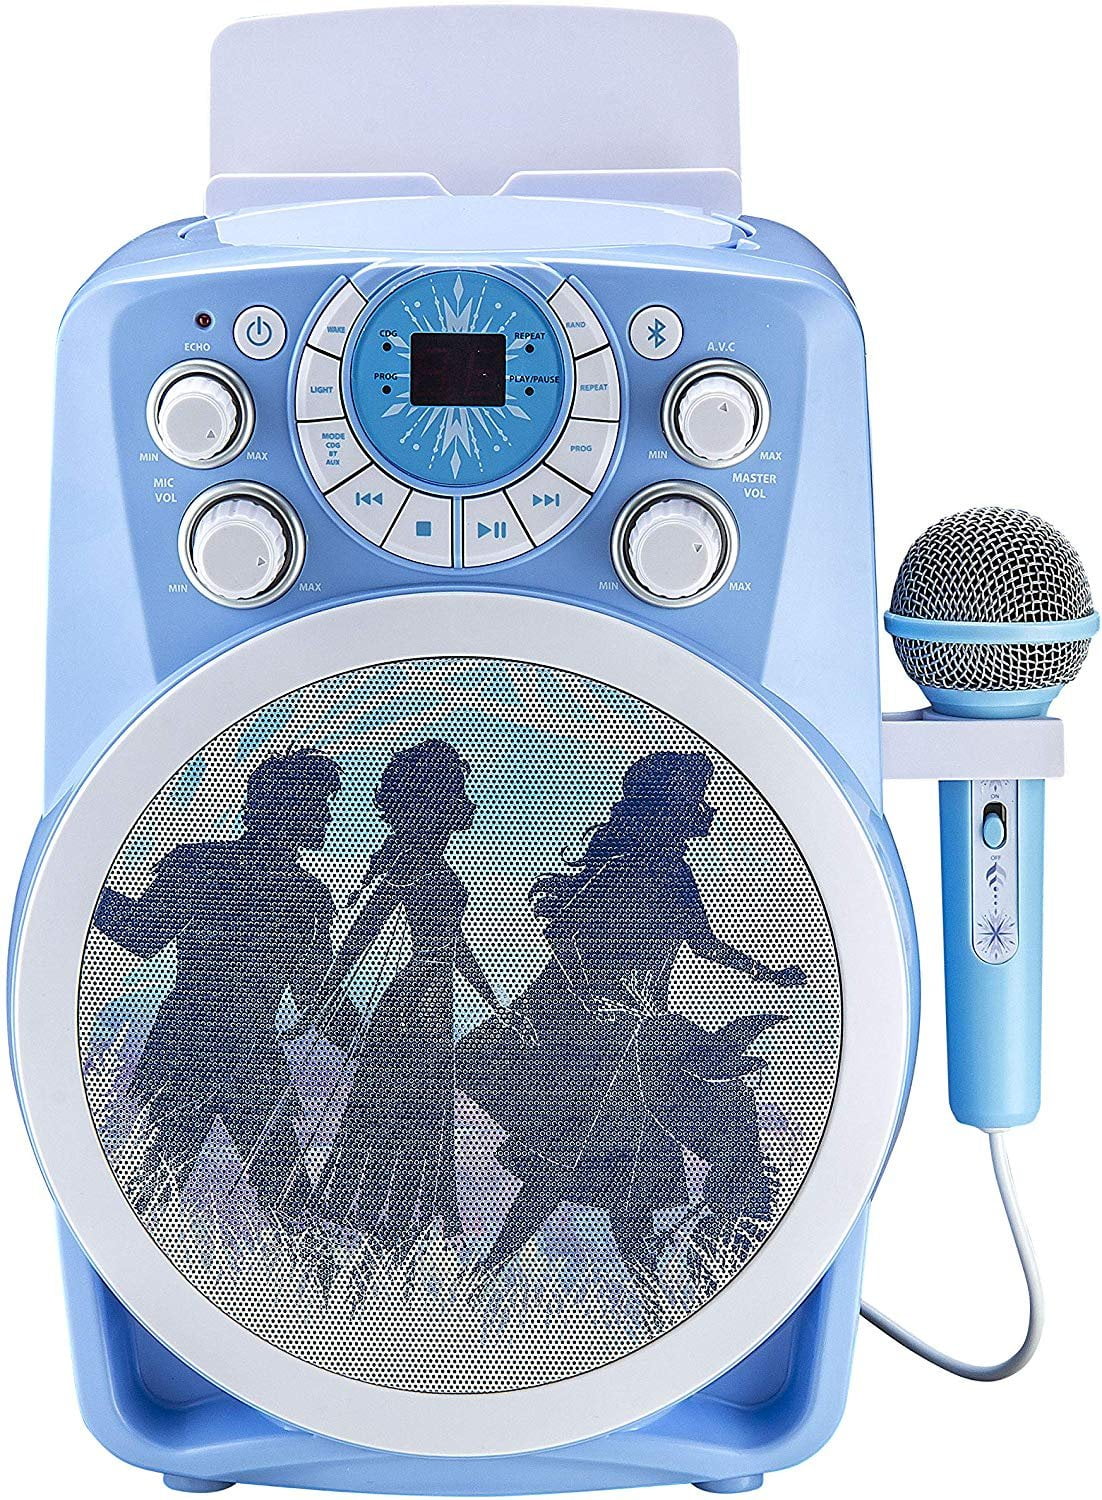 FROZEN toy Microphone with flashing lights-echo microphone connect phone/stereo 